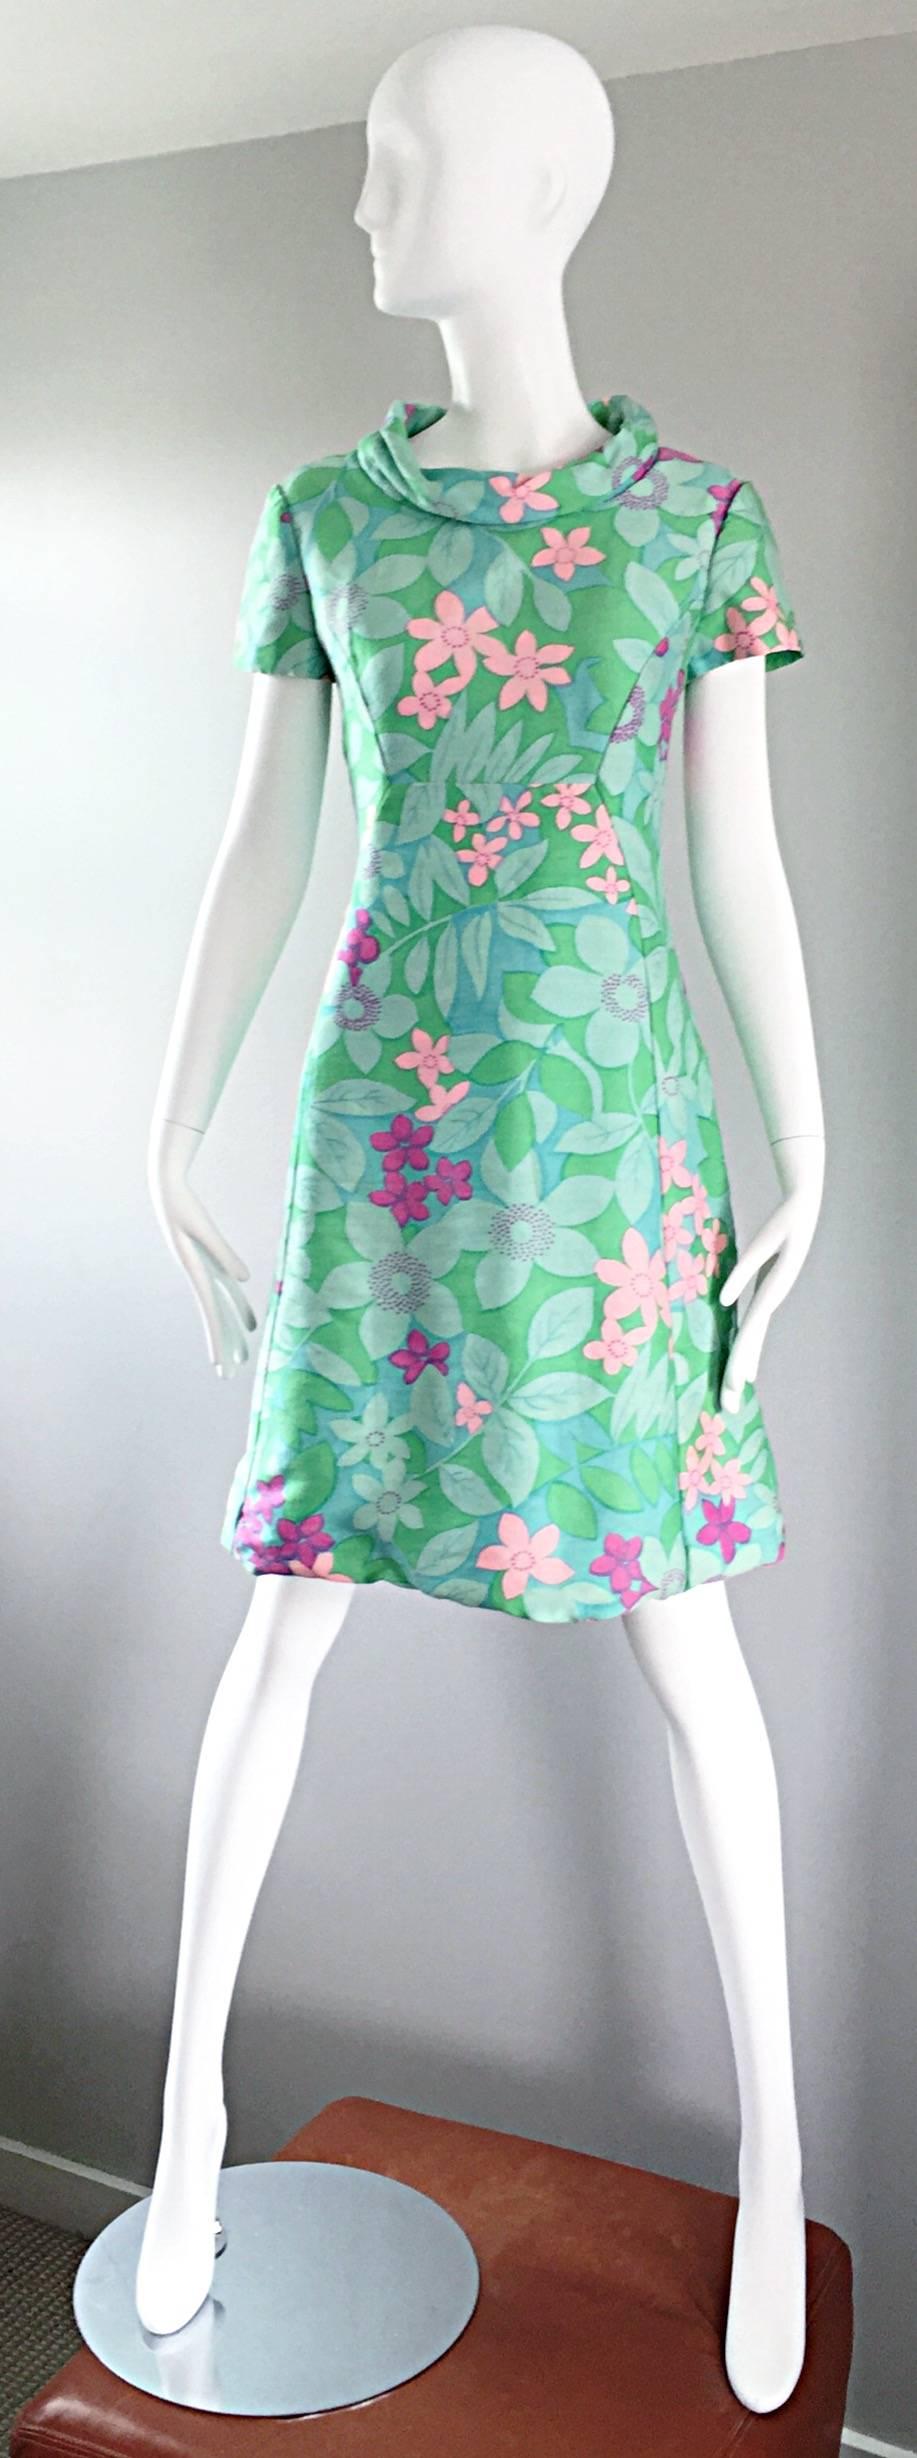 Such a chic and adorable vintage 1960s ADELE SIMSPON Jackie-O style       A-Line dress! Features pastel colors of green, pink, blue and purple in a whimsical flowers and leaves print. Tailored short sleeves, with a bit of a cowl neckline. Full